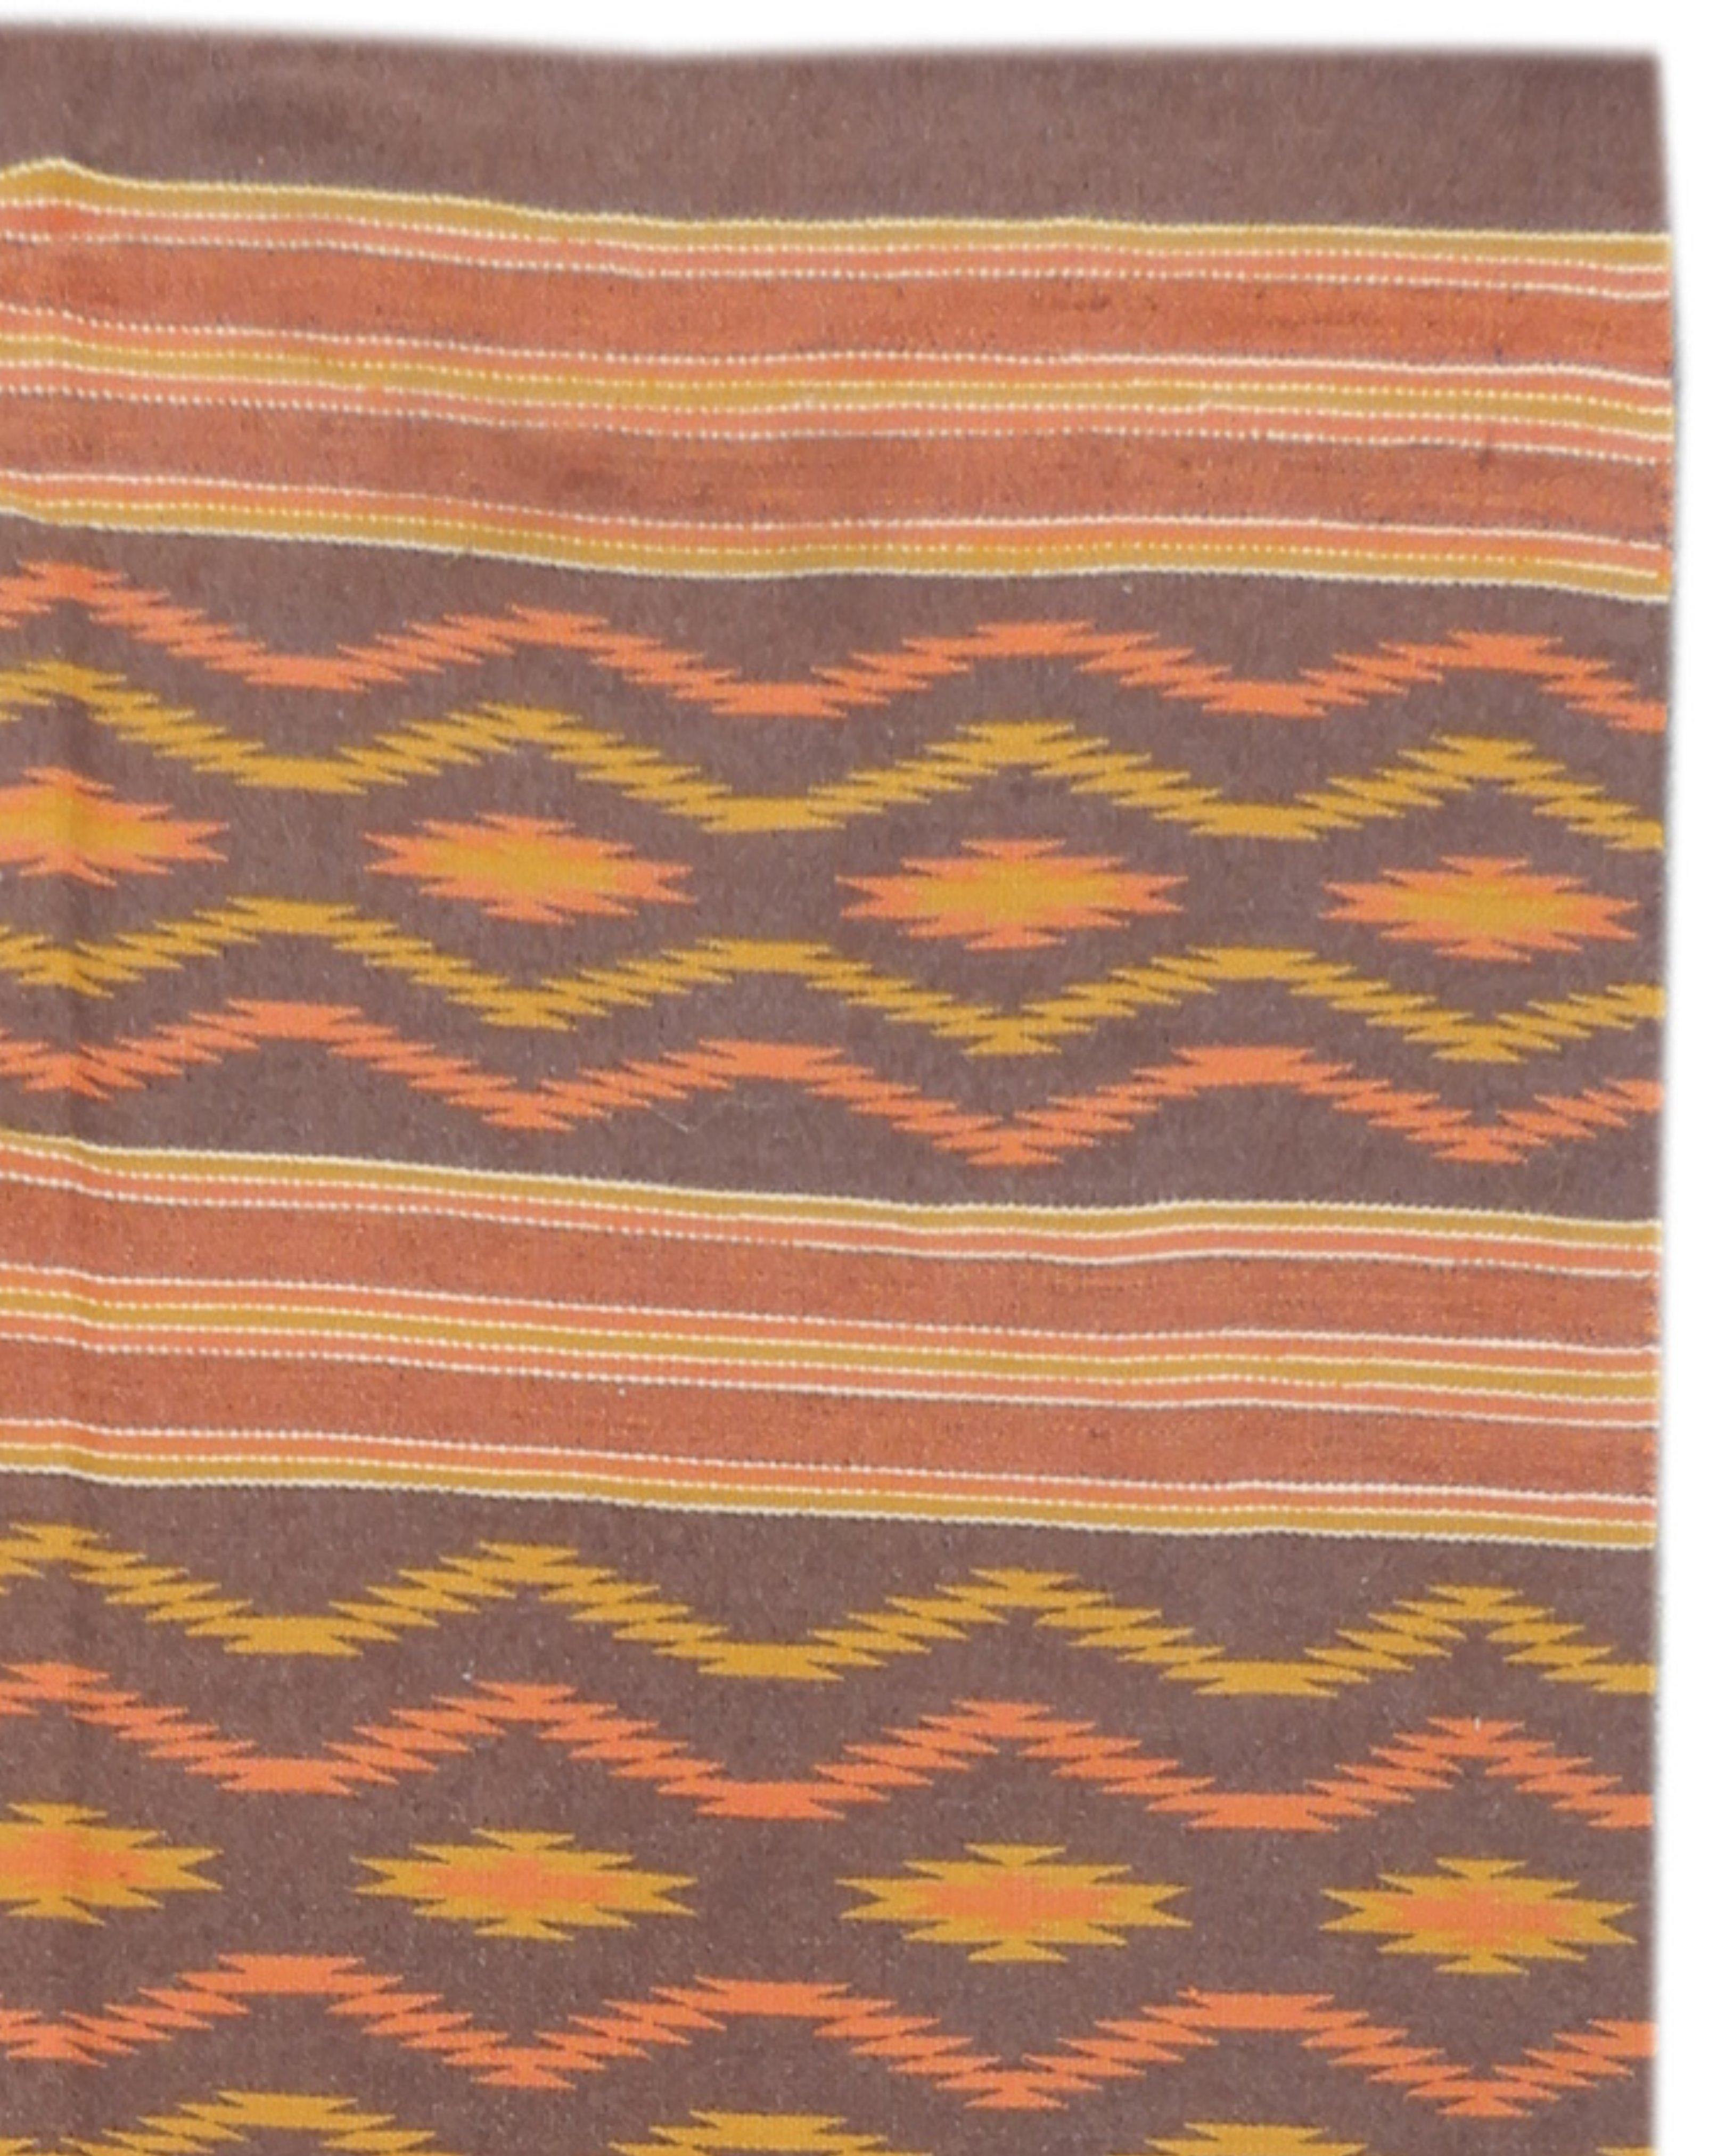 Vintage Navajo Rug, Mid-20th Century

Collection of Dr. and Mrs. William T. Price.

Additional Information
Dimensions: 6'10